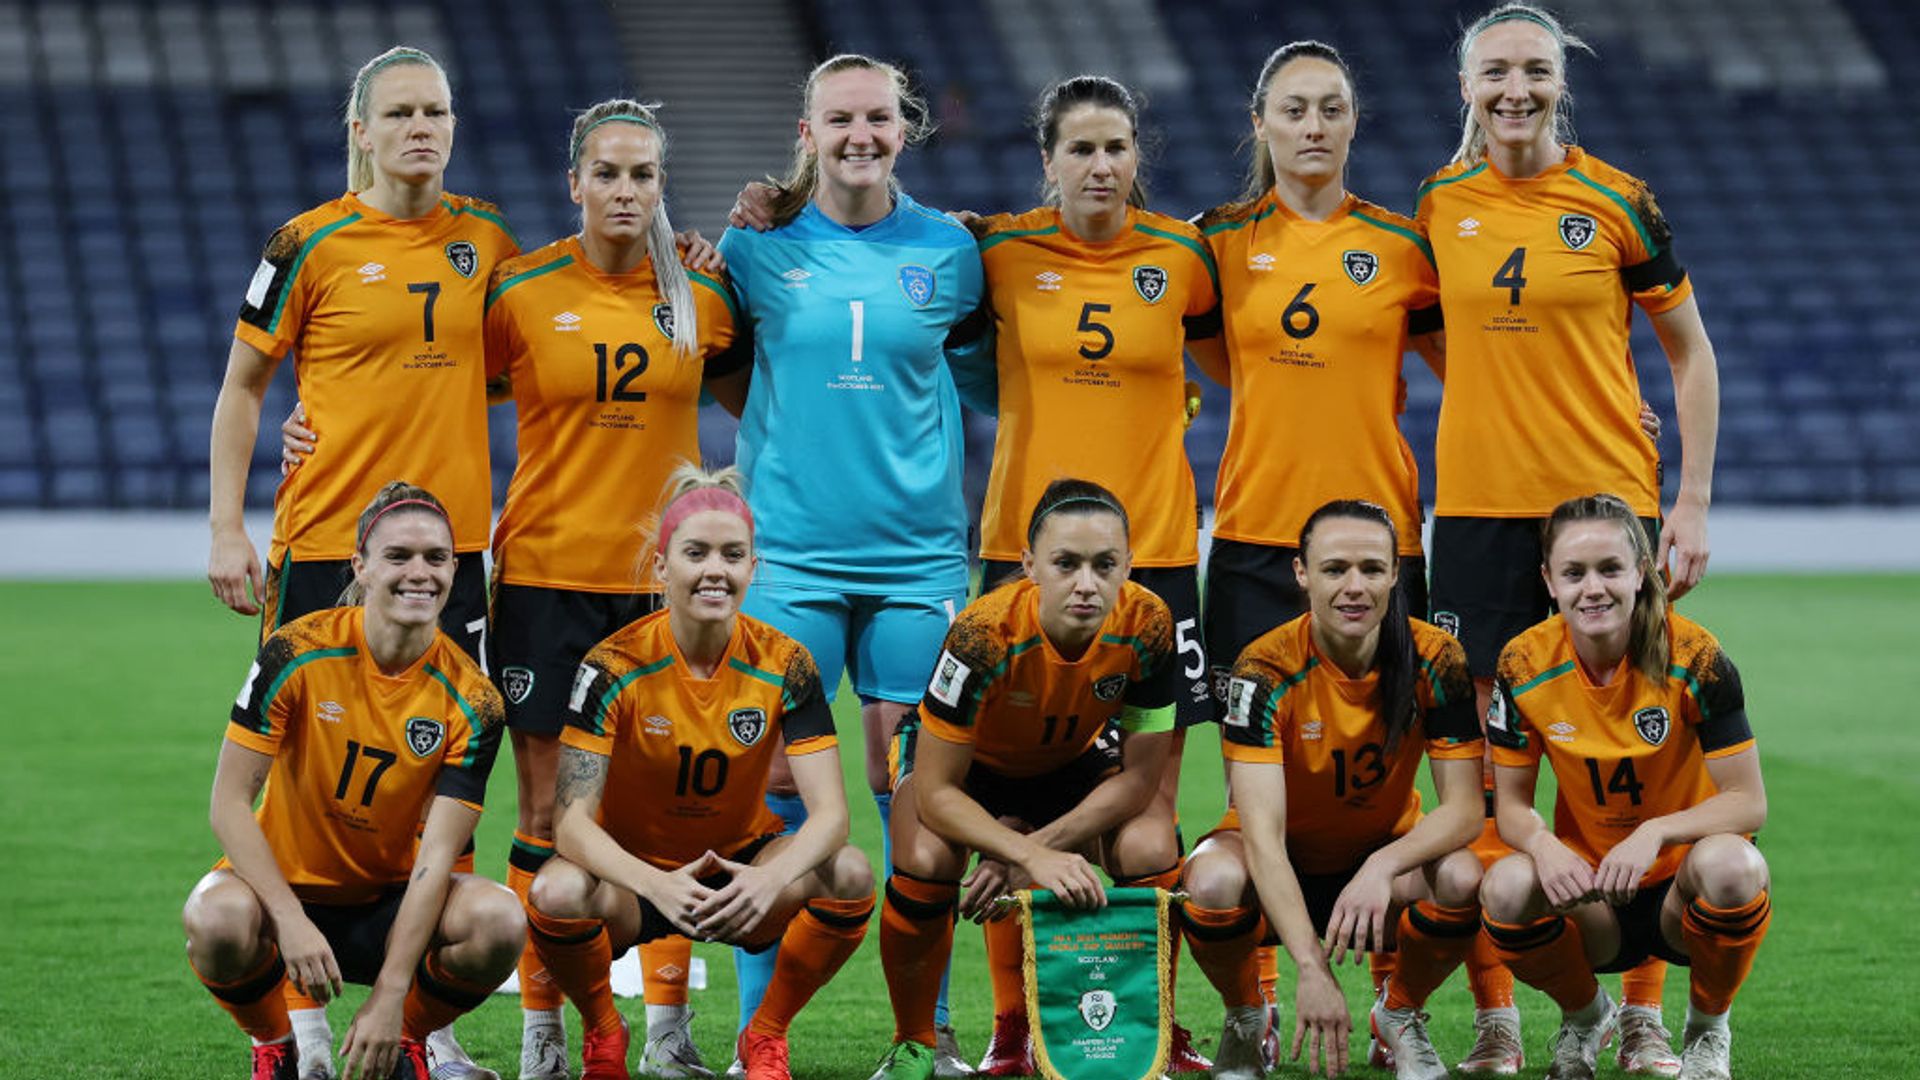 FAI fined by UEFA after Rep of Ireland Women's pro-IRA song